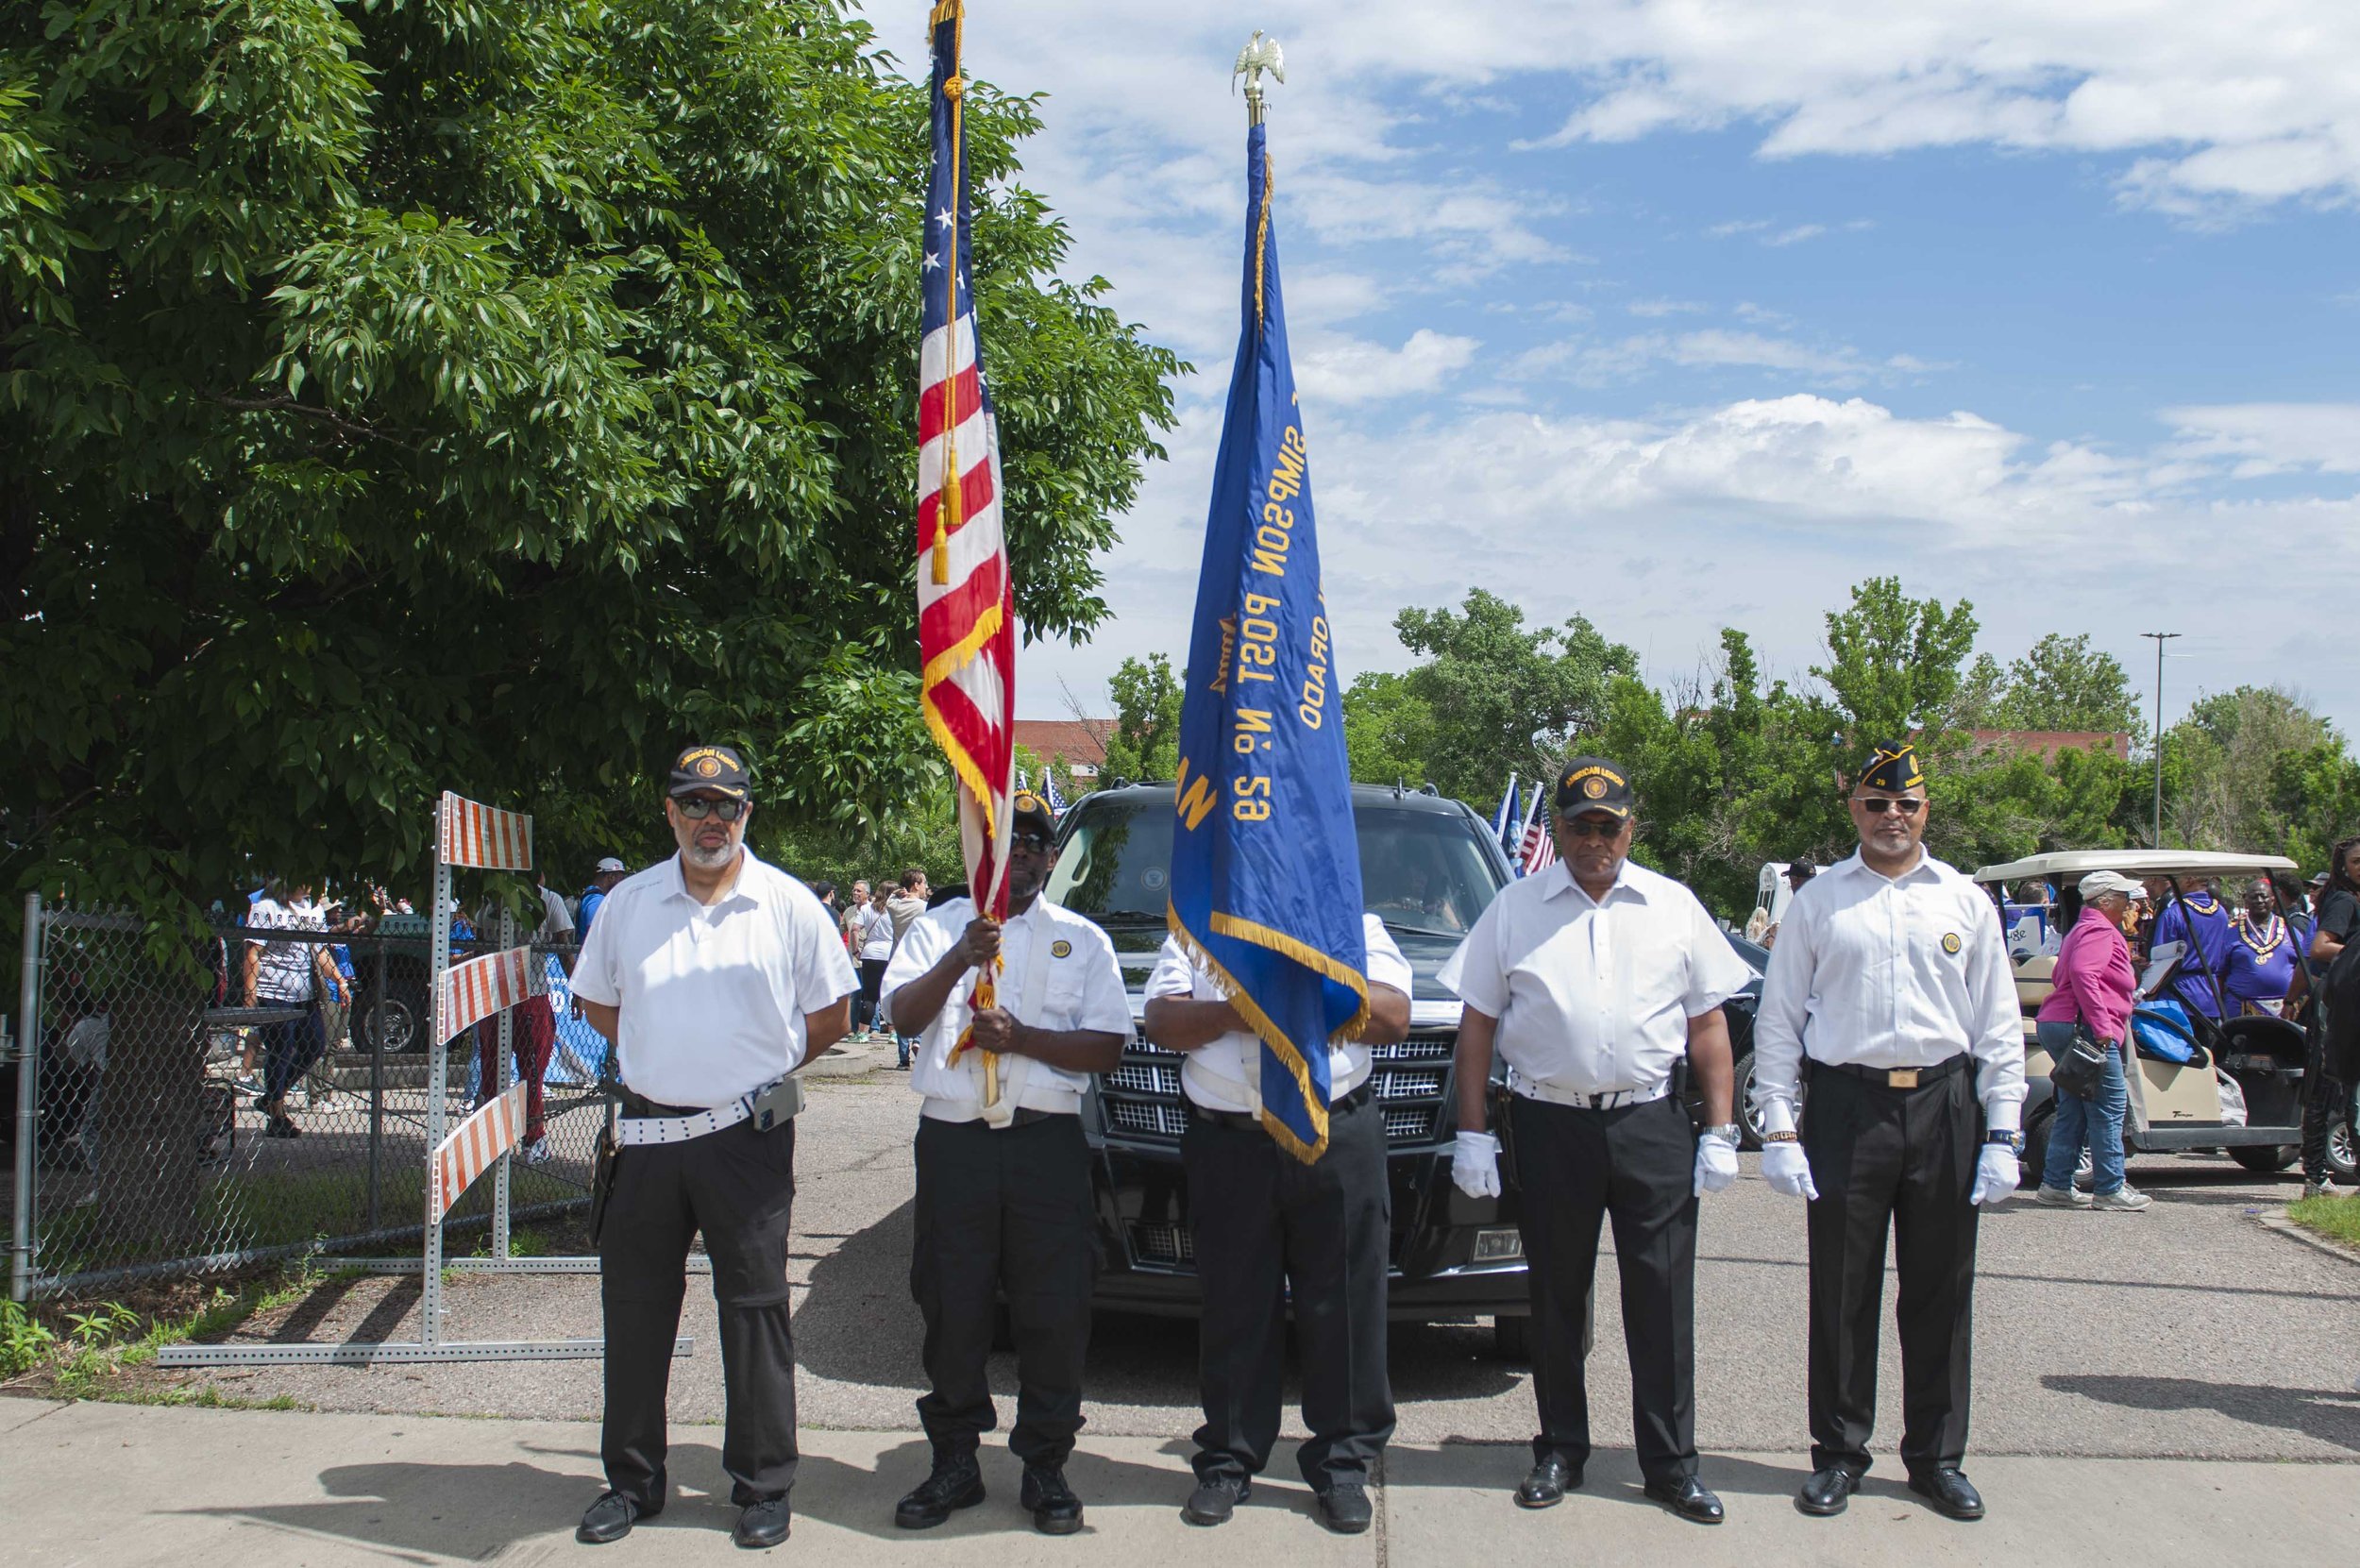    The Wallace Simpson American Legions, Post 29 prepare to lead the crowd and start the annual Juneteenth parade.   